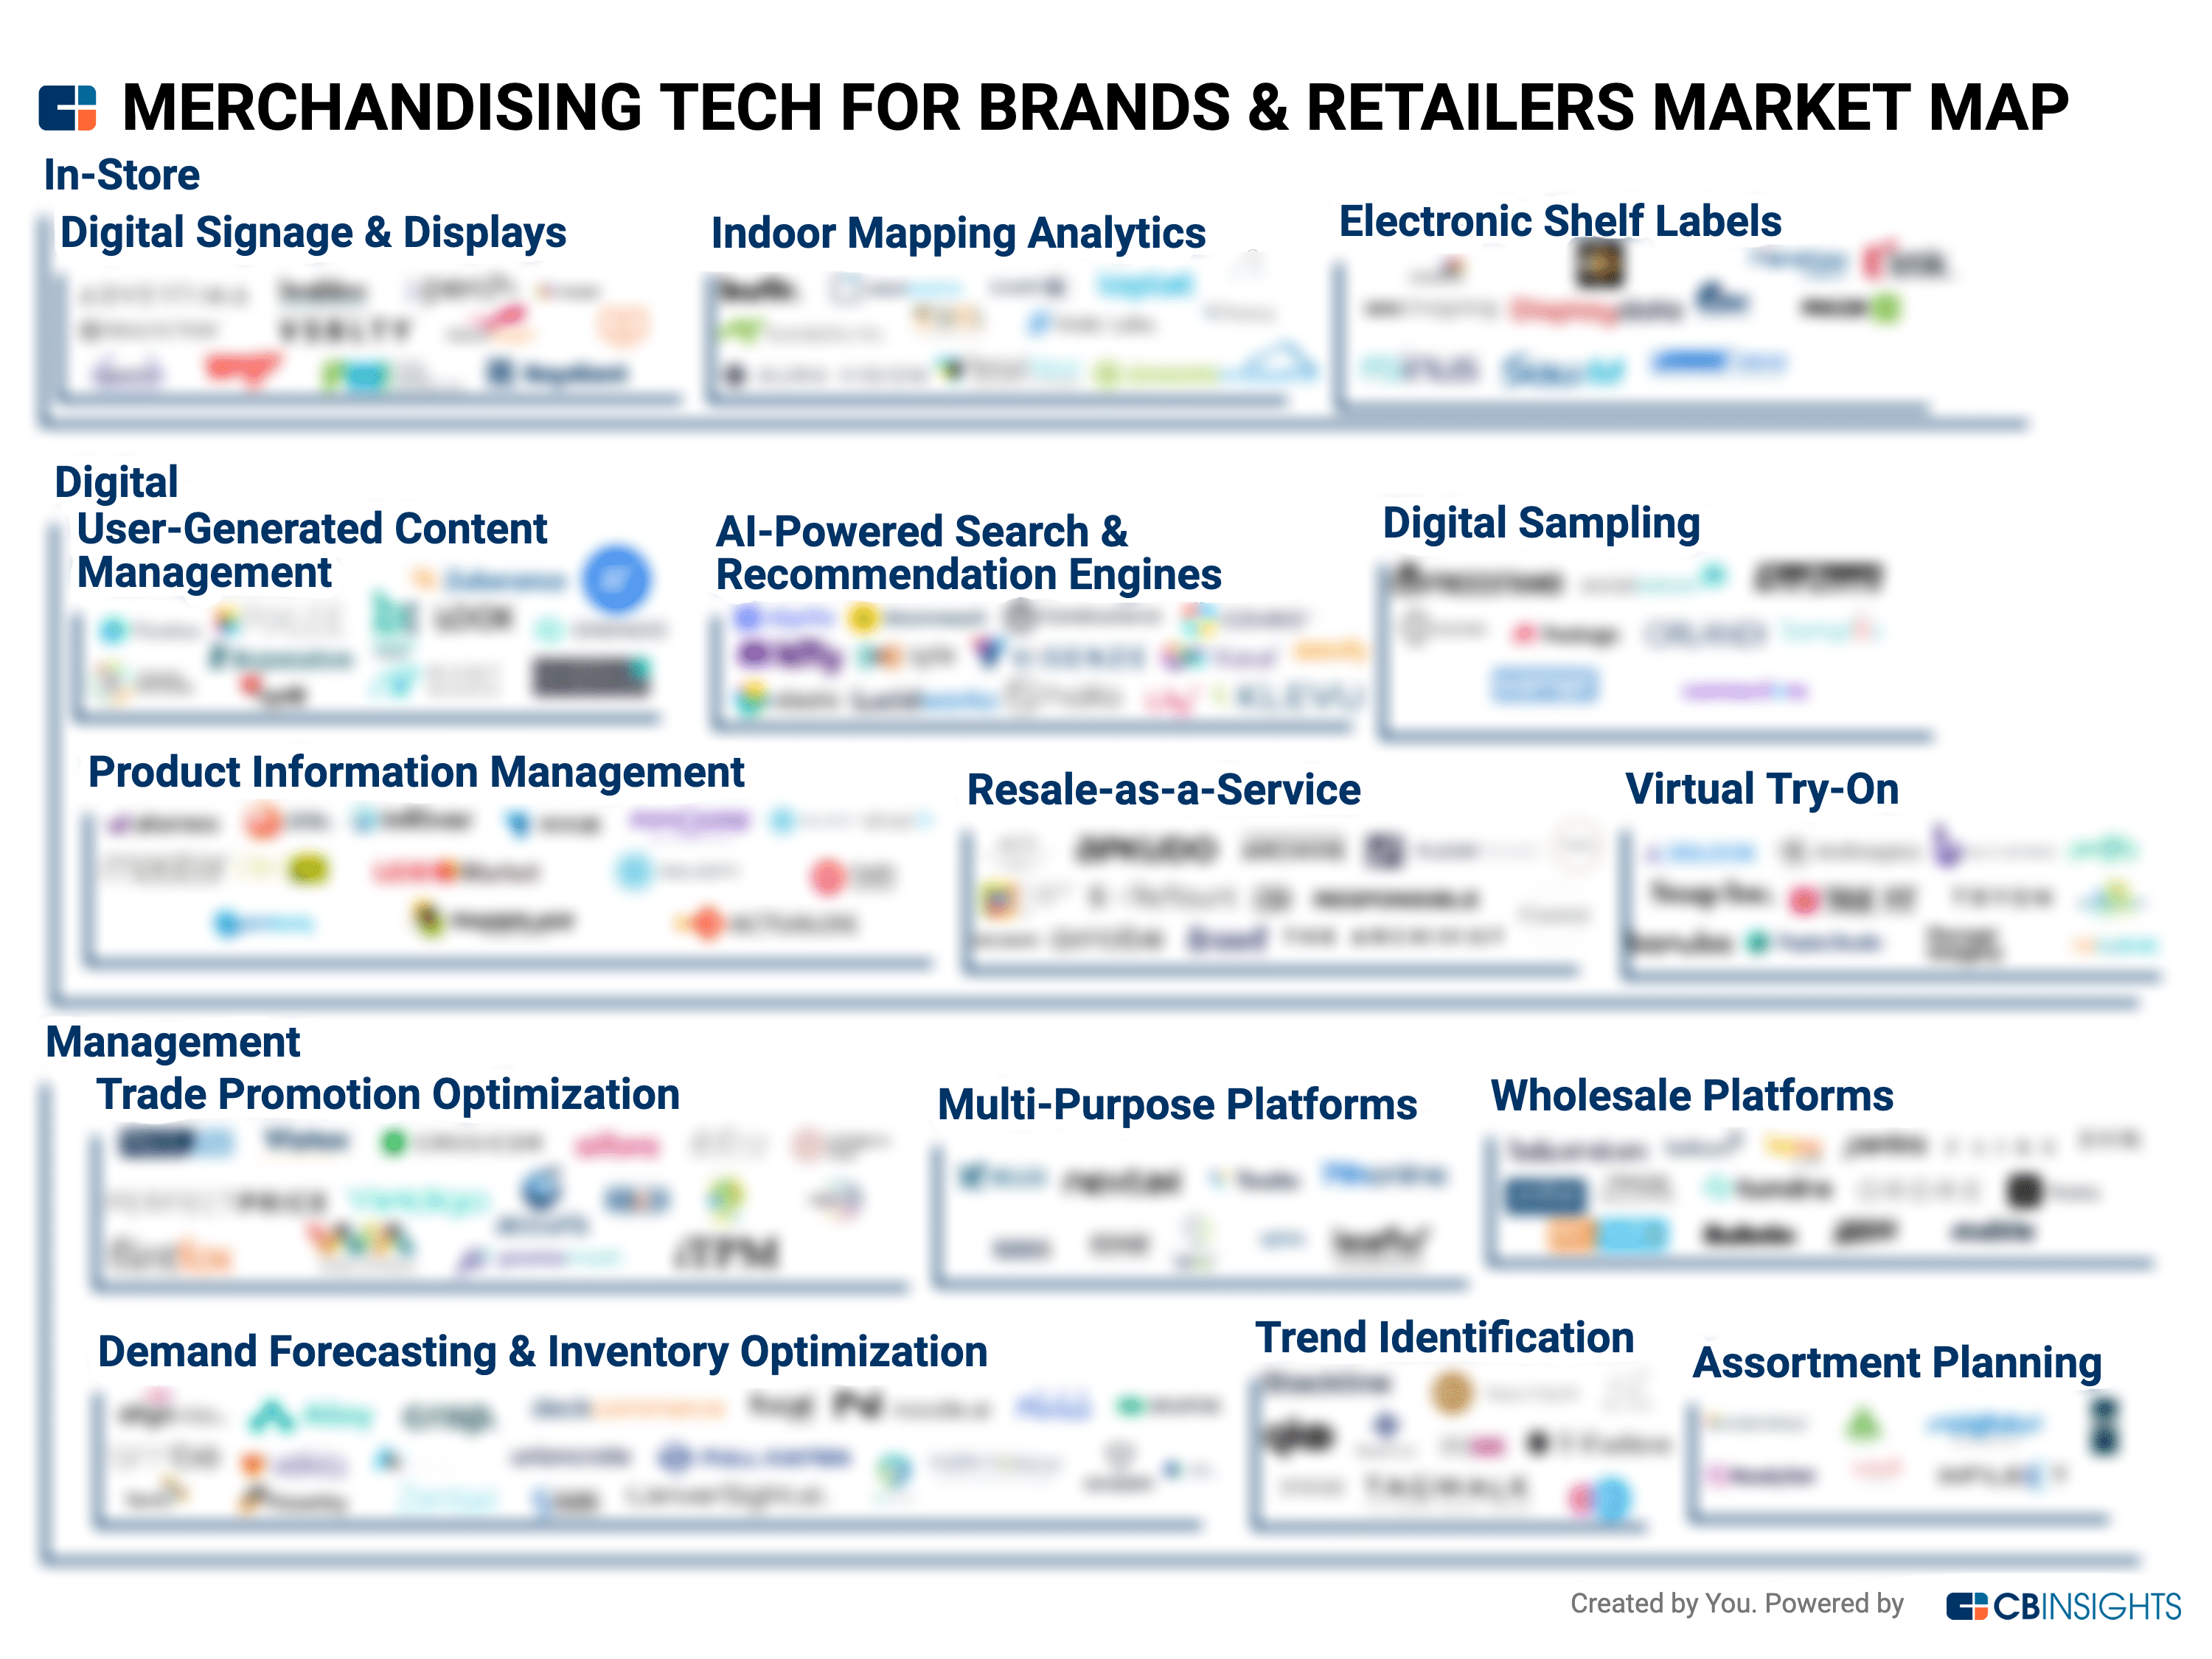 Software and Insights for Brands and Retailers